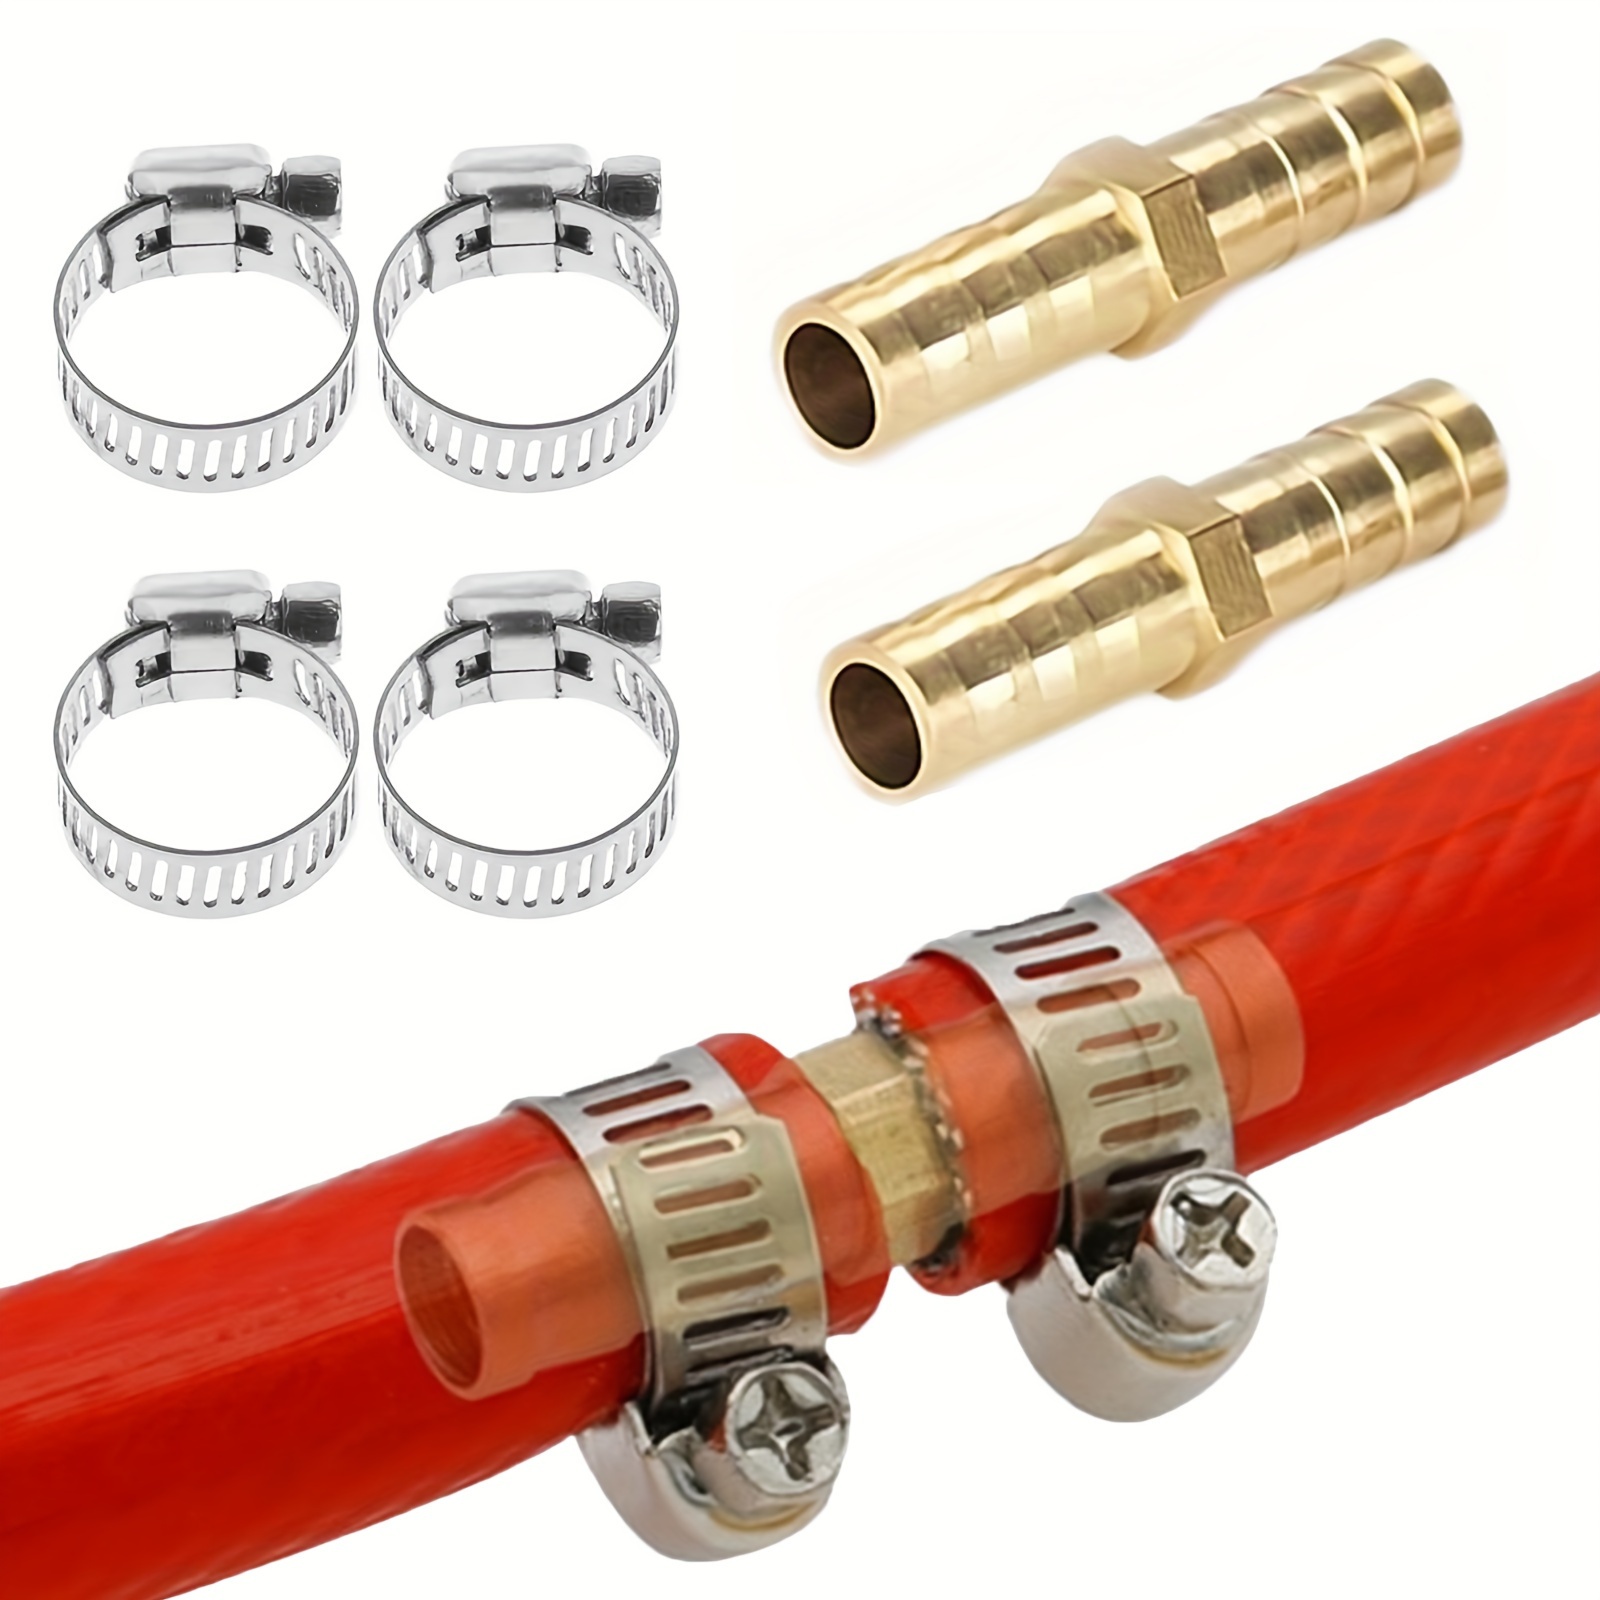 

2 Sets, Brass Hose Barb Fitting Metals Splicer Mender With 4pc 304 Stainless Steel Clamps, Garden Water Pipe Connector Pagoda Double Pass For Air/water/fuel/oil, Straight, Two-way